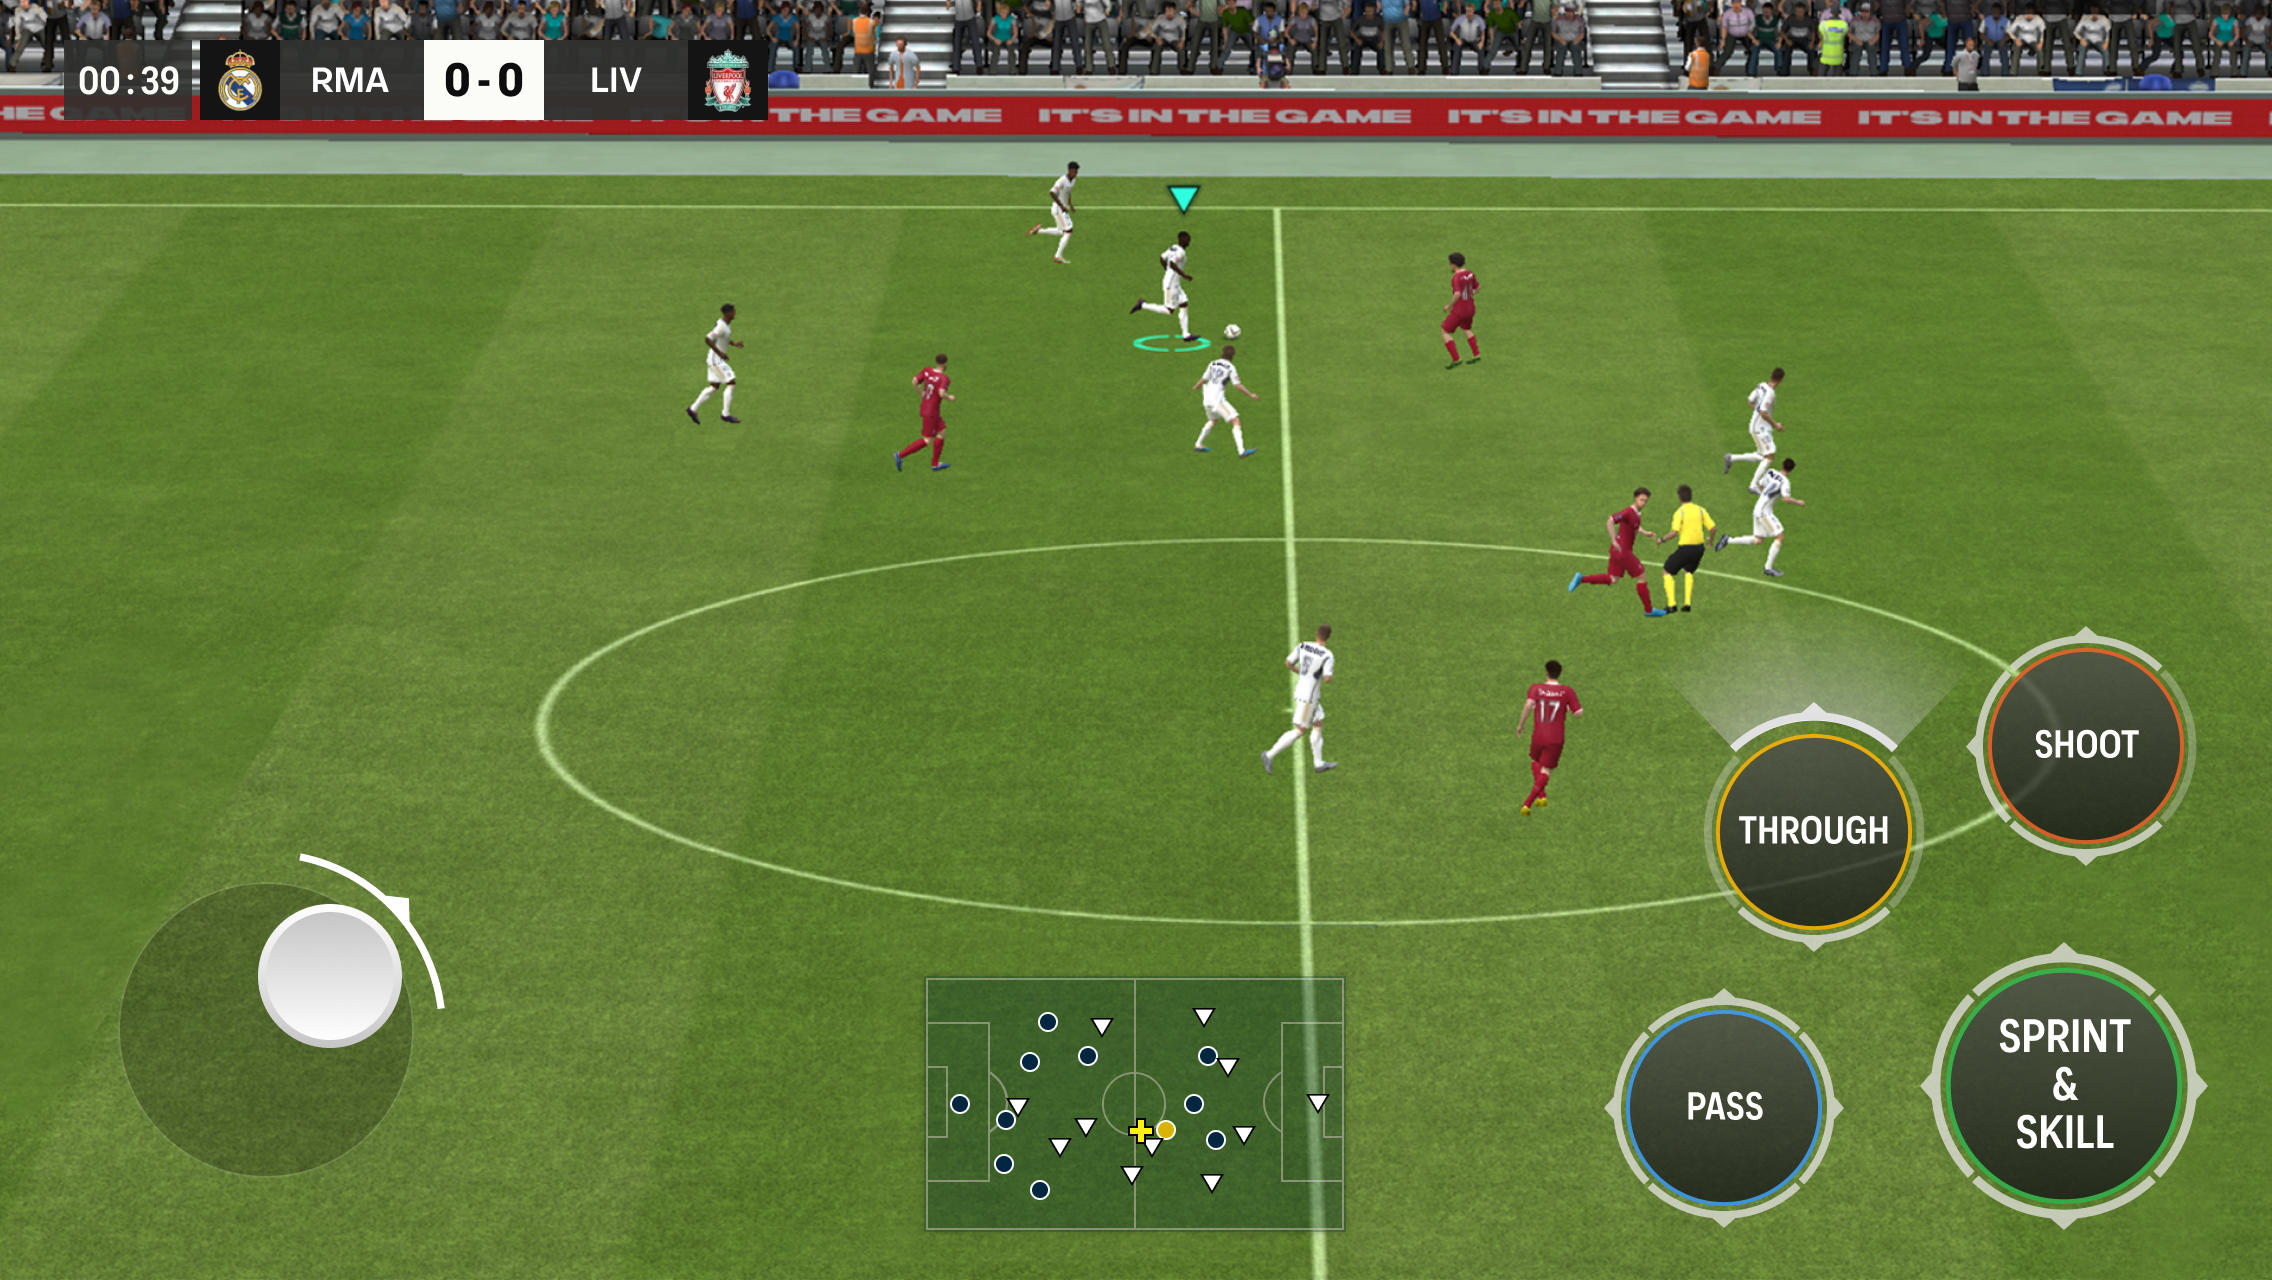 EA SPORTS FC Mobile 24 BETA Android Gameplay 